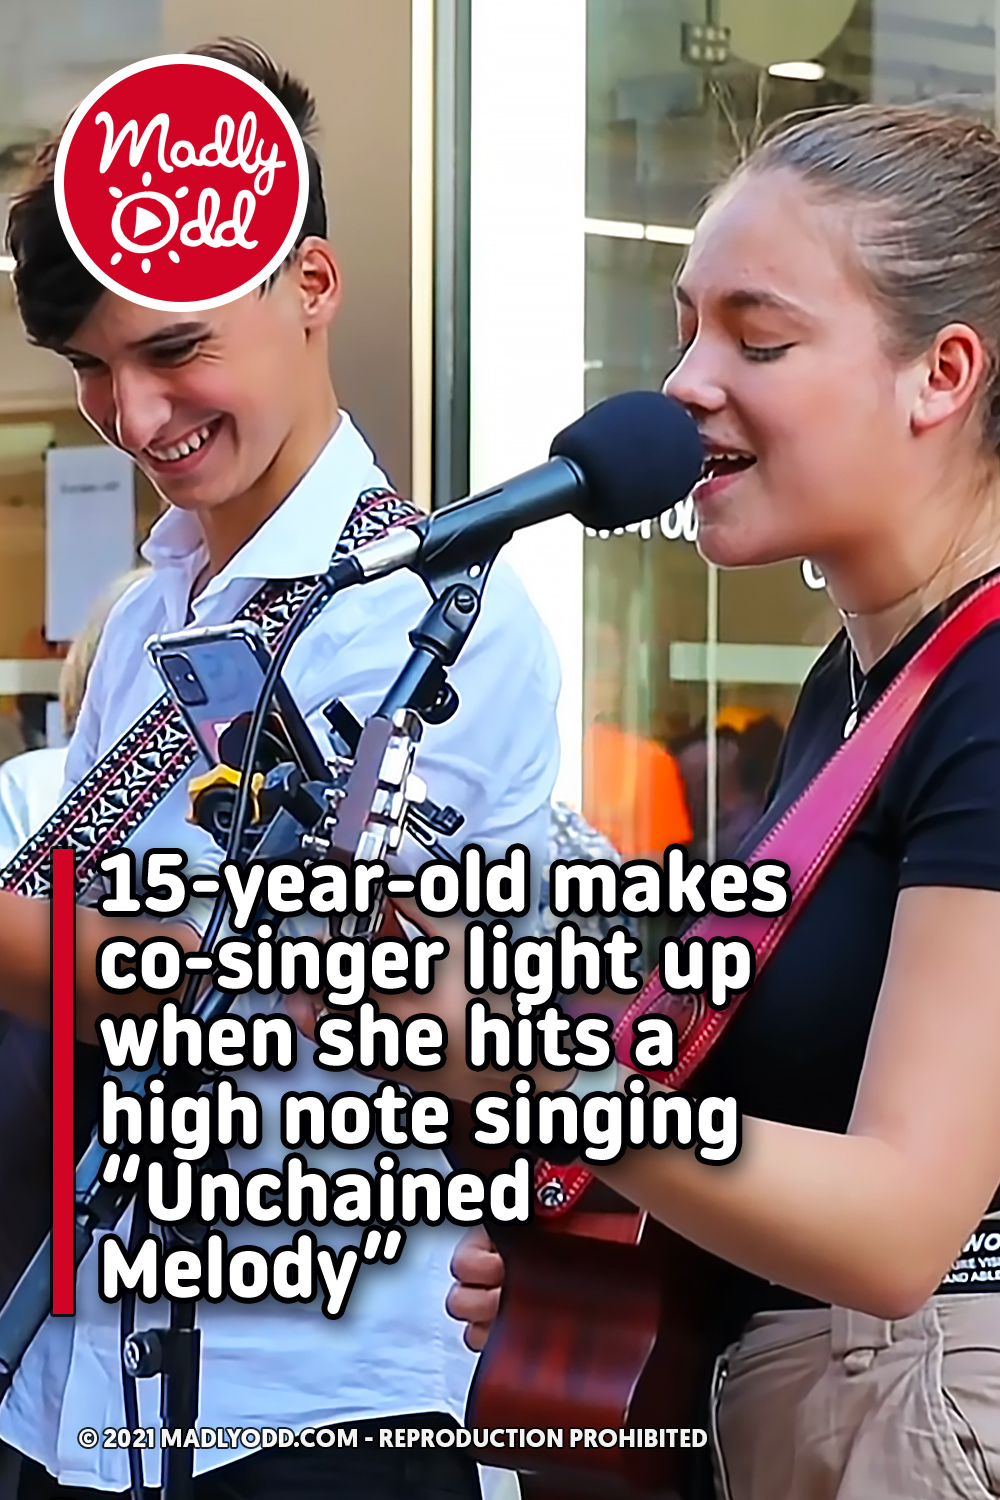 15-year-old makes co-singer light up when she hits a high note singing “Unchained Melody”